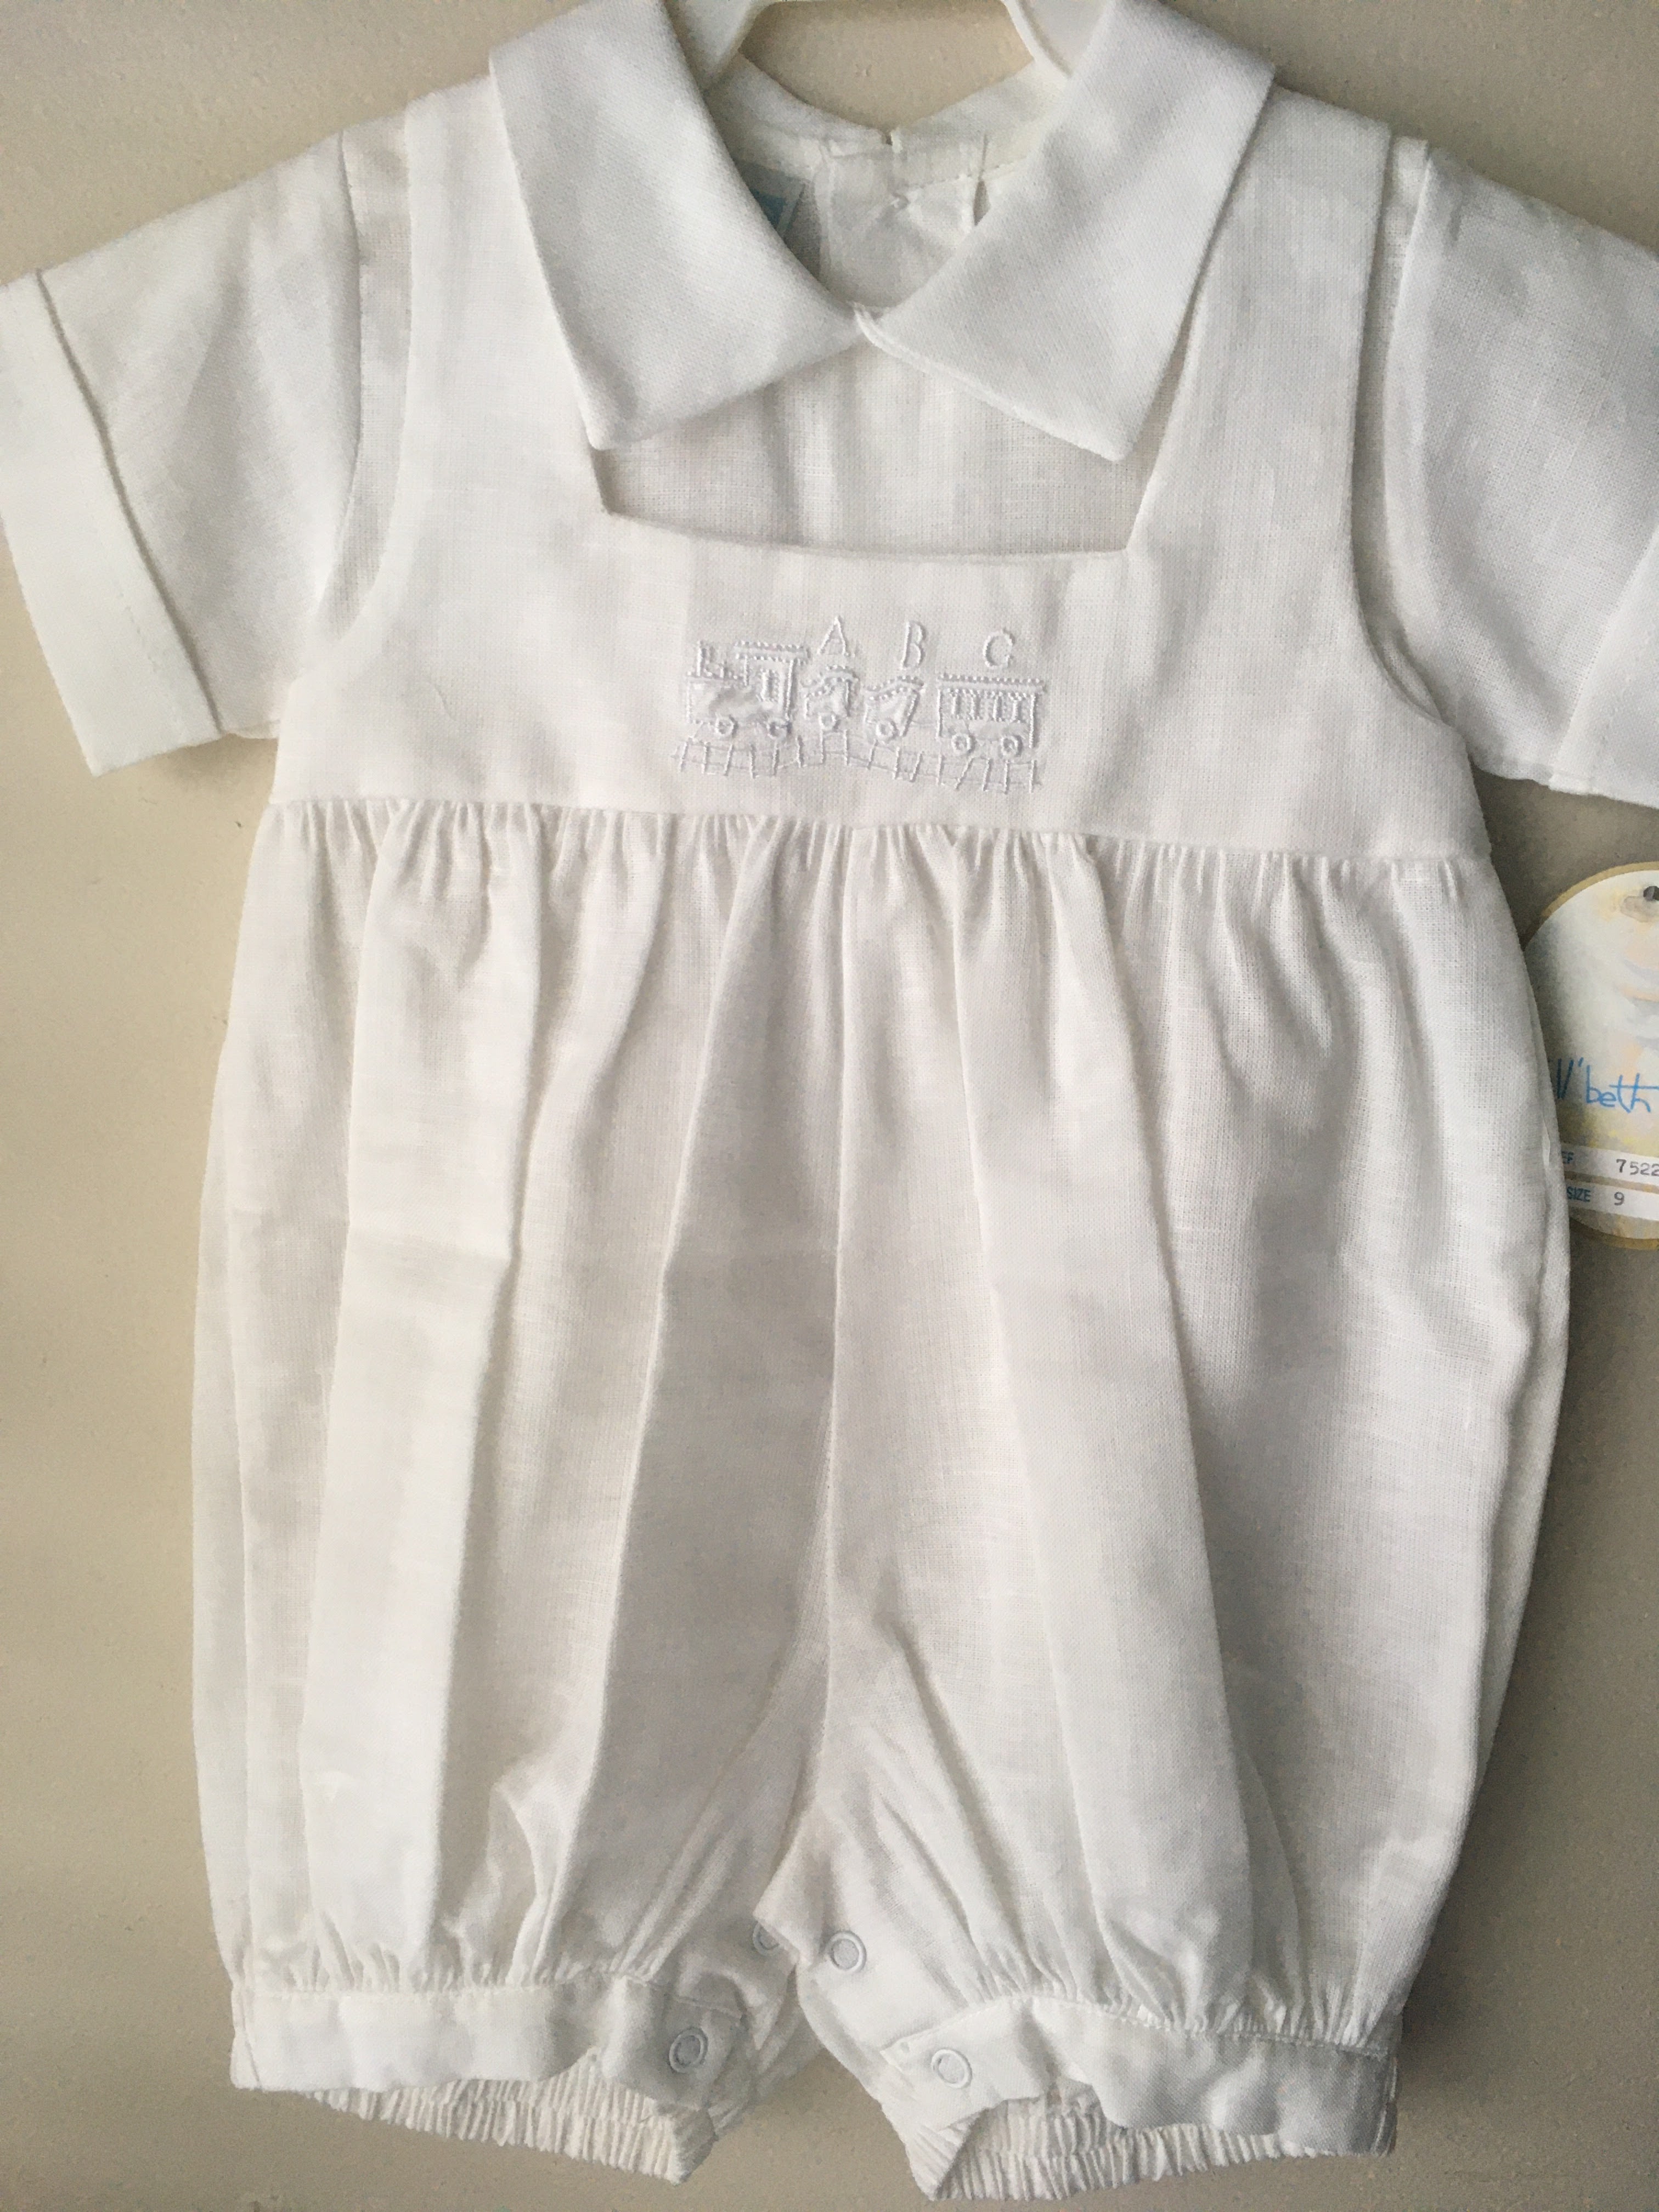 Will' beth All in One Baby Boy Outfit